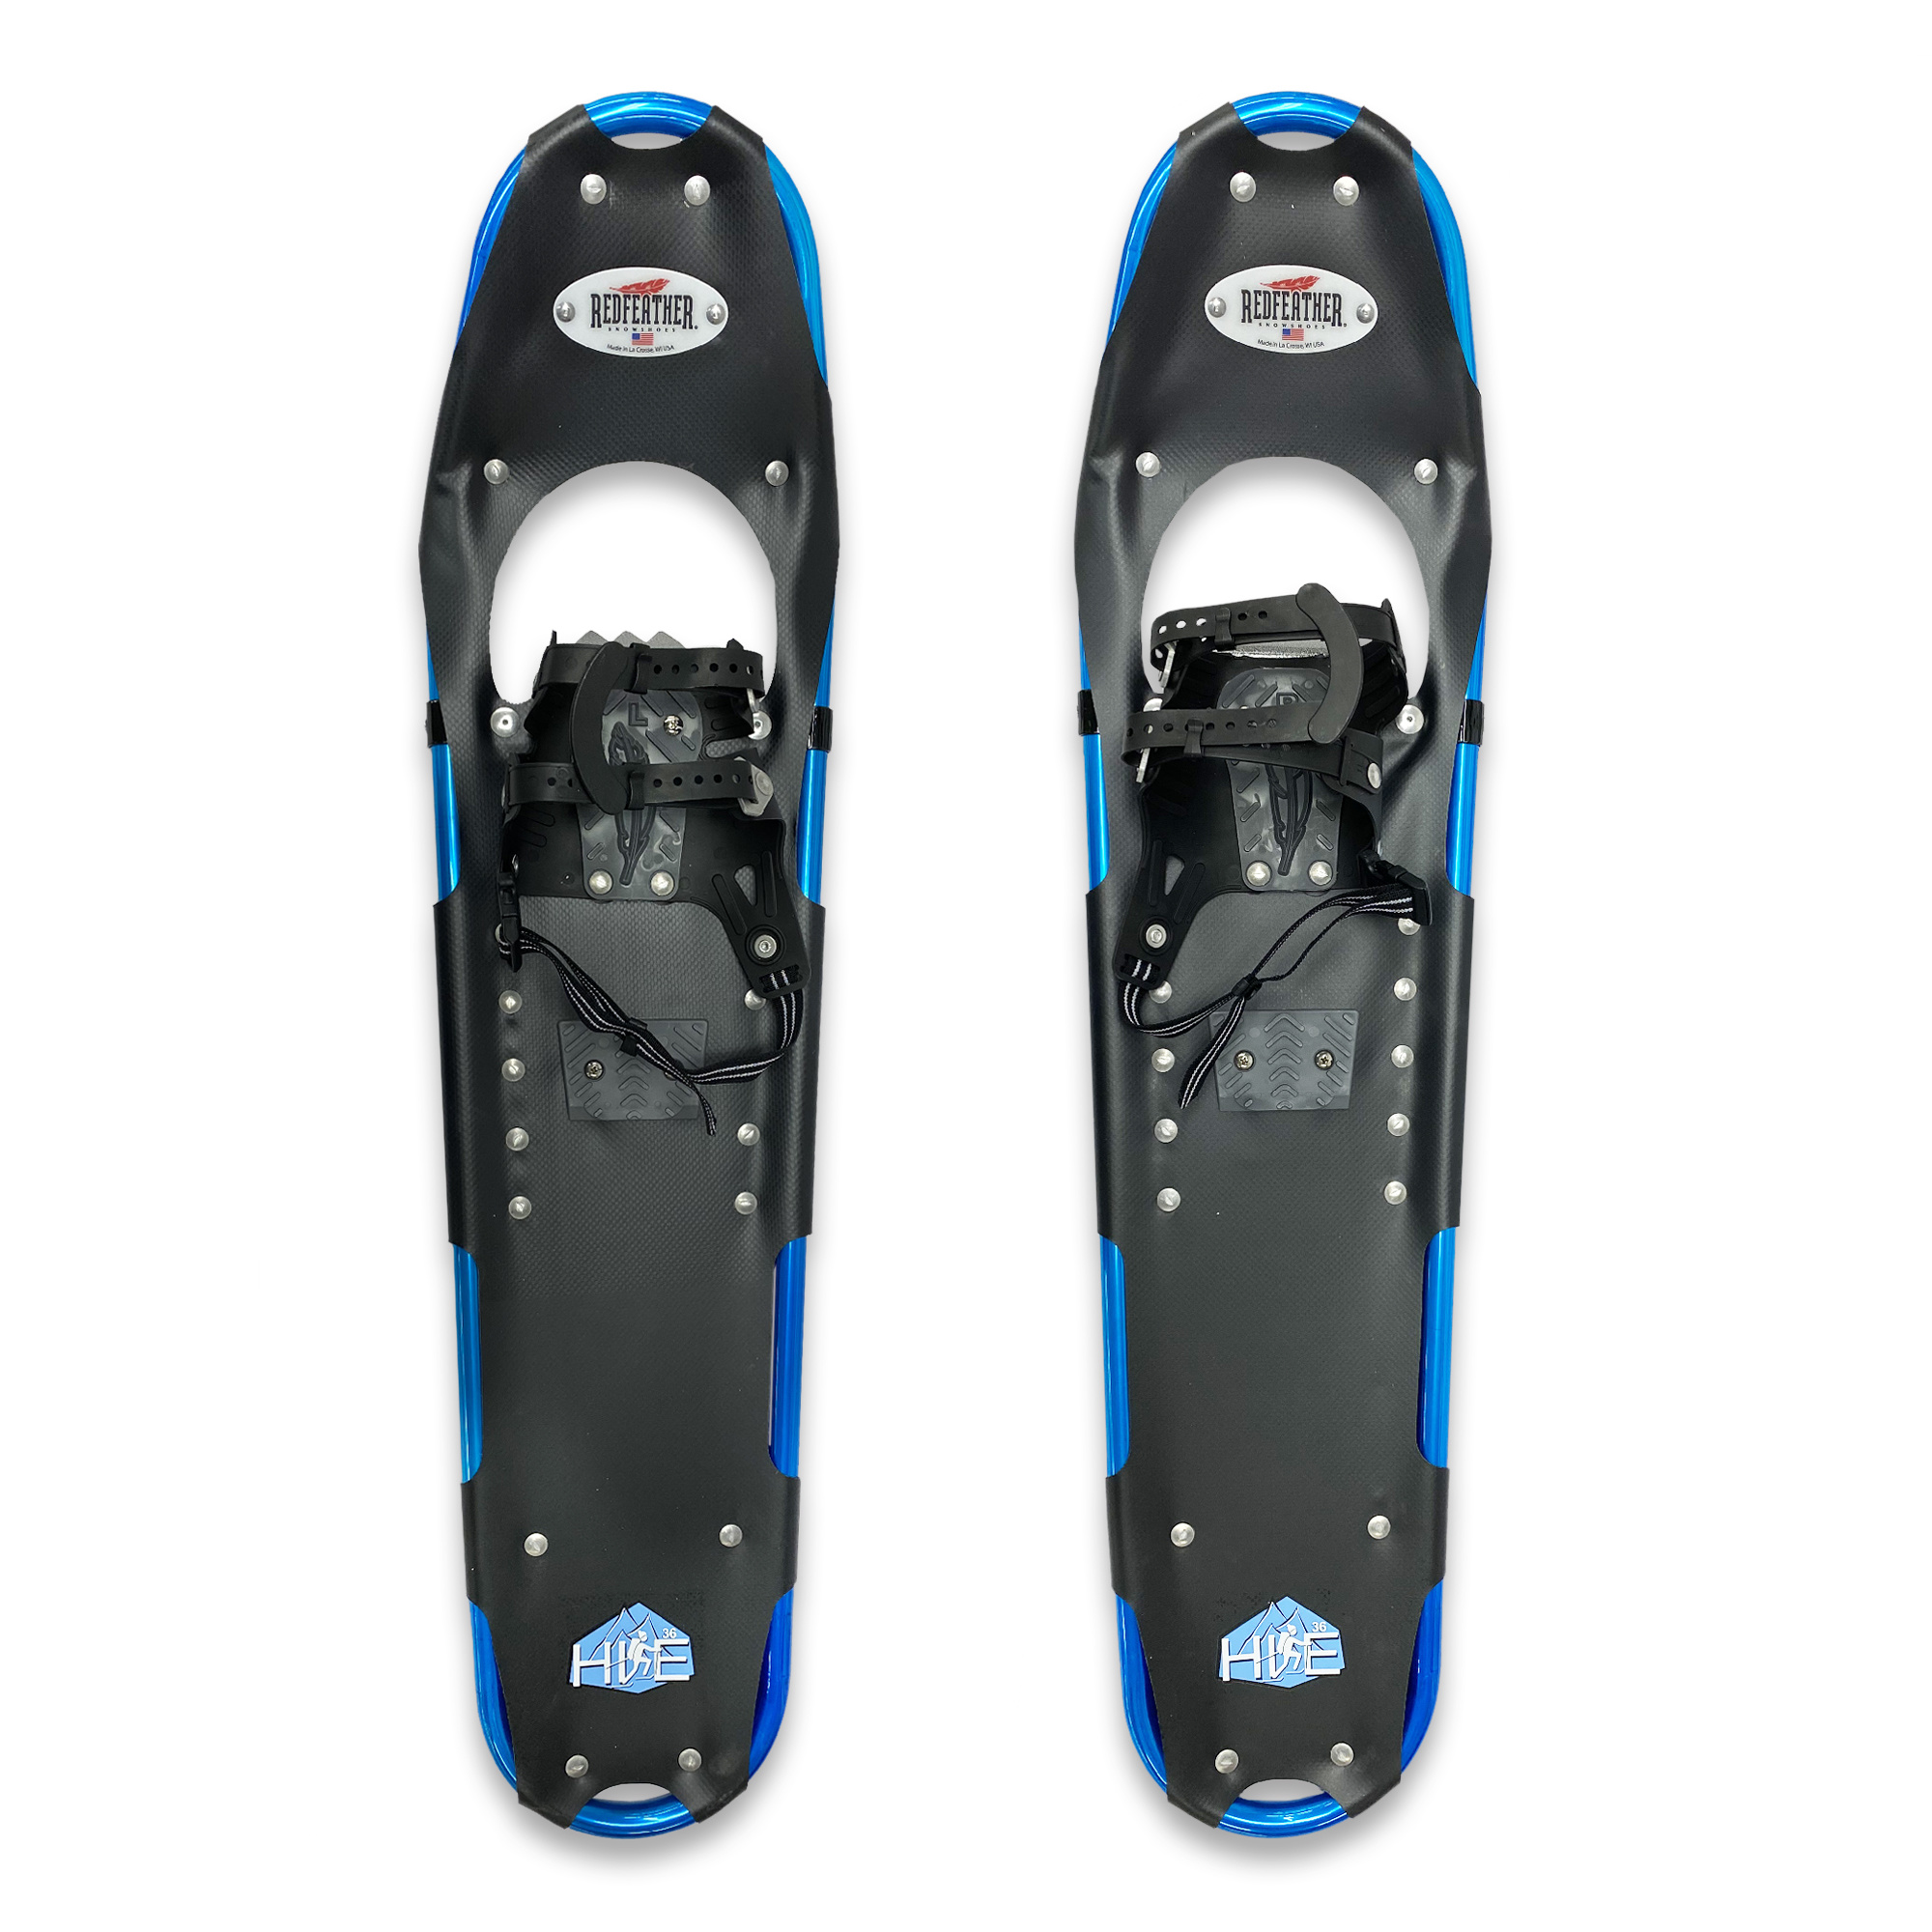 Redfeather Snow Shoes - Hike Series 9.5" X 36 Kit